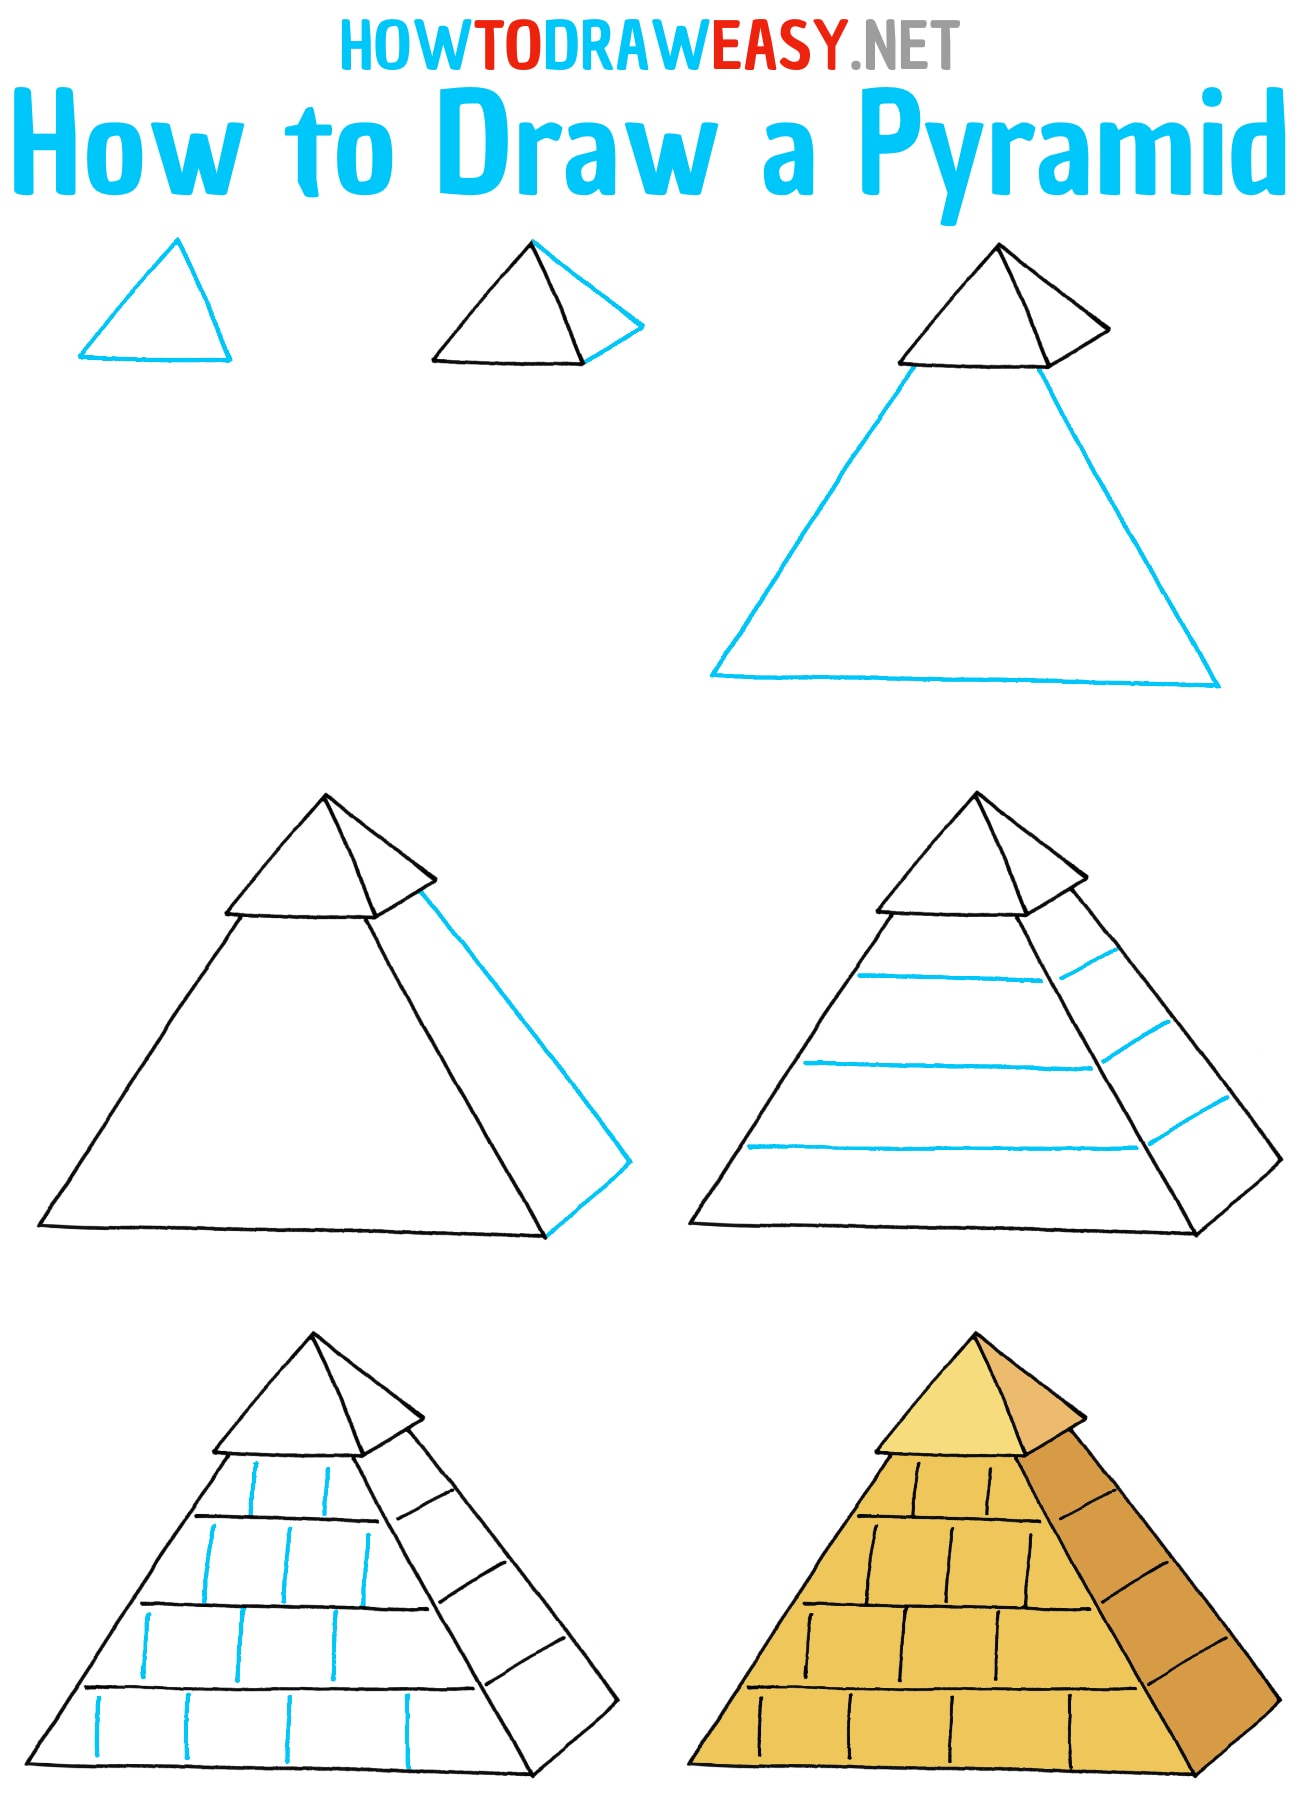 How to Draw a Pyramid Step by Step